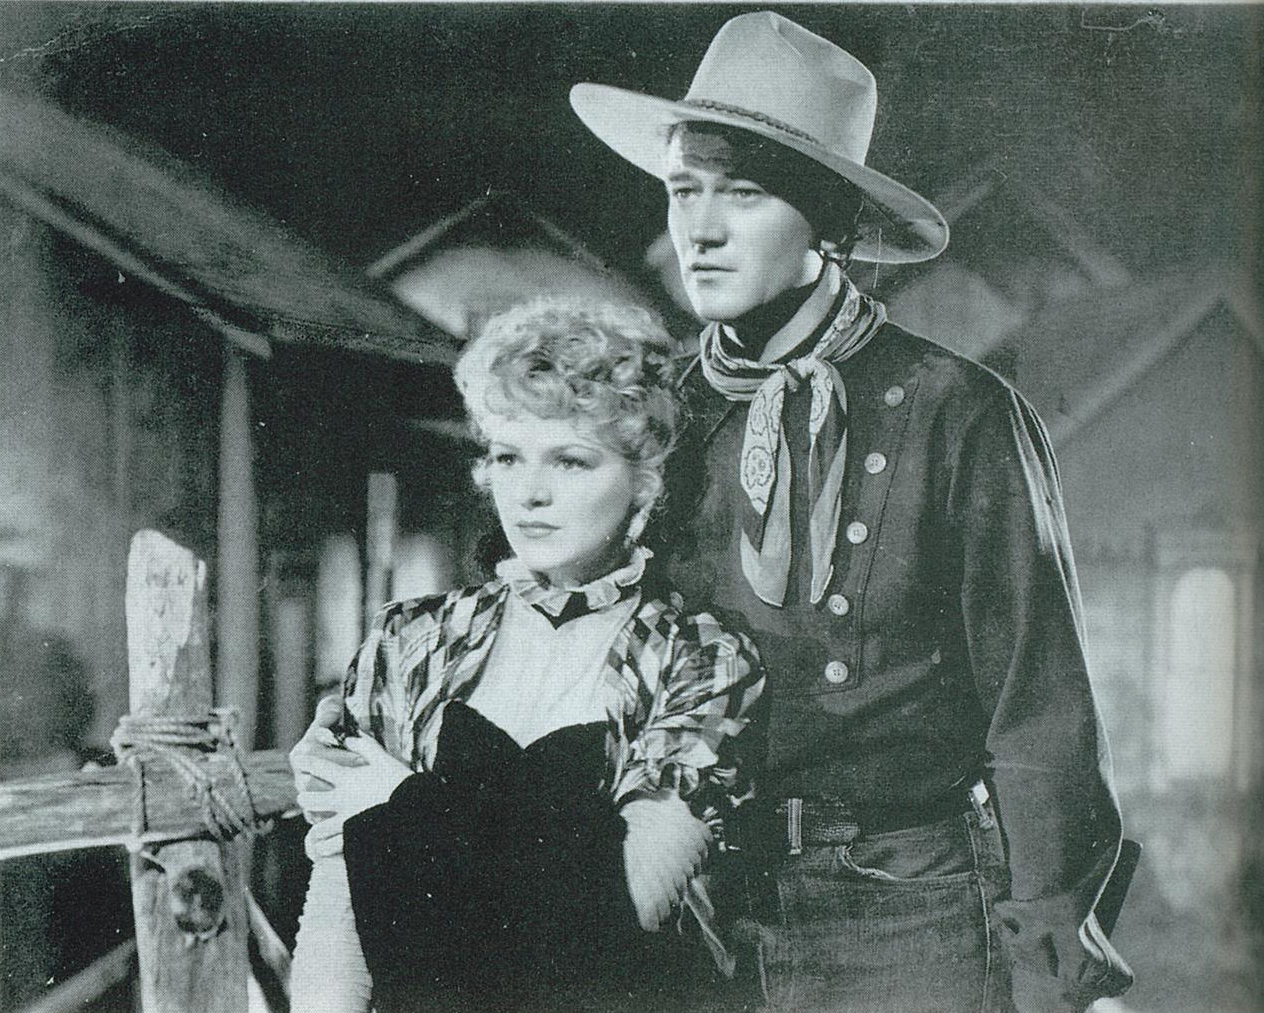 John Wayne and Claire Trevor in Stage Coach 1939